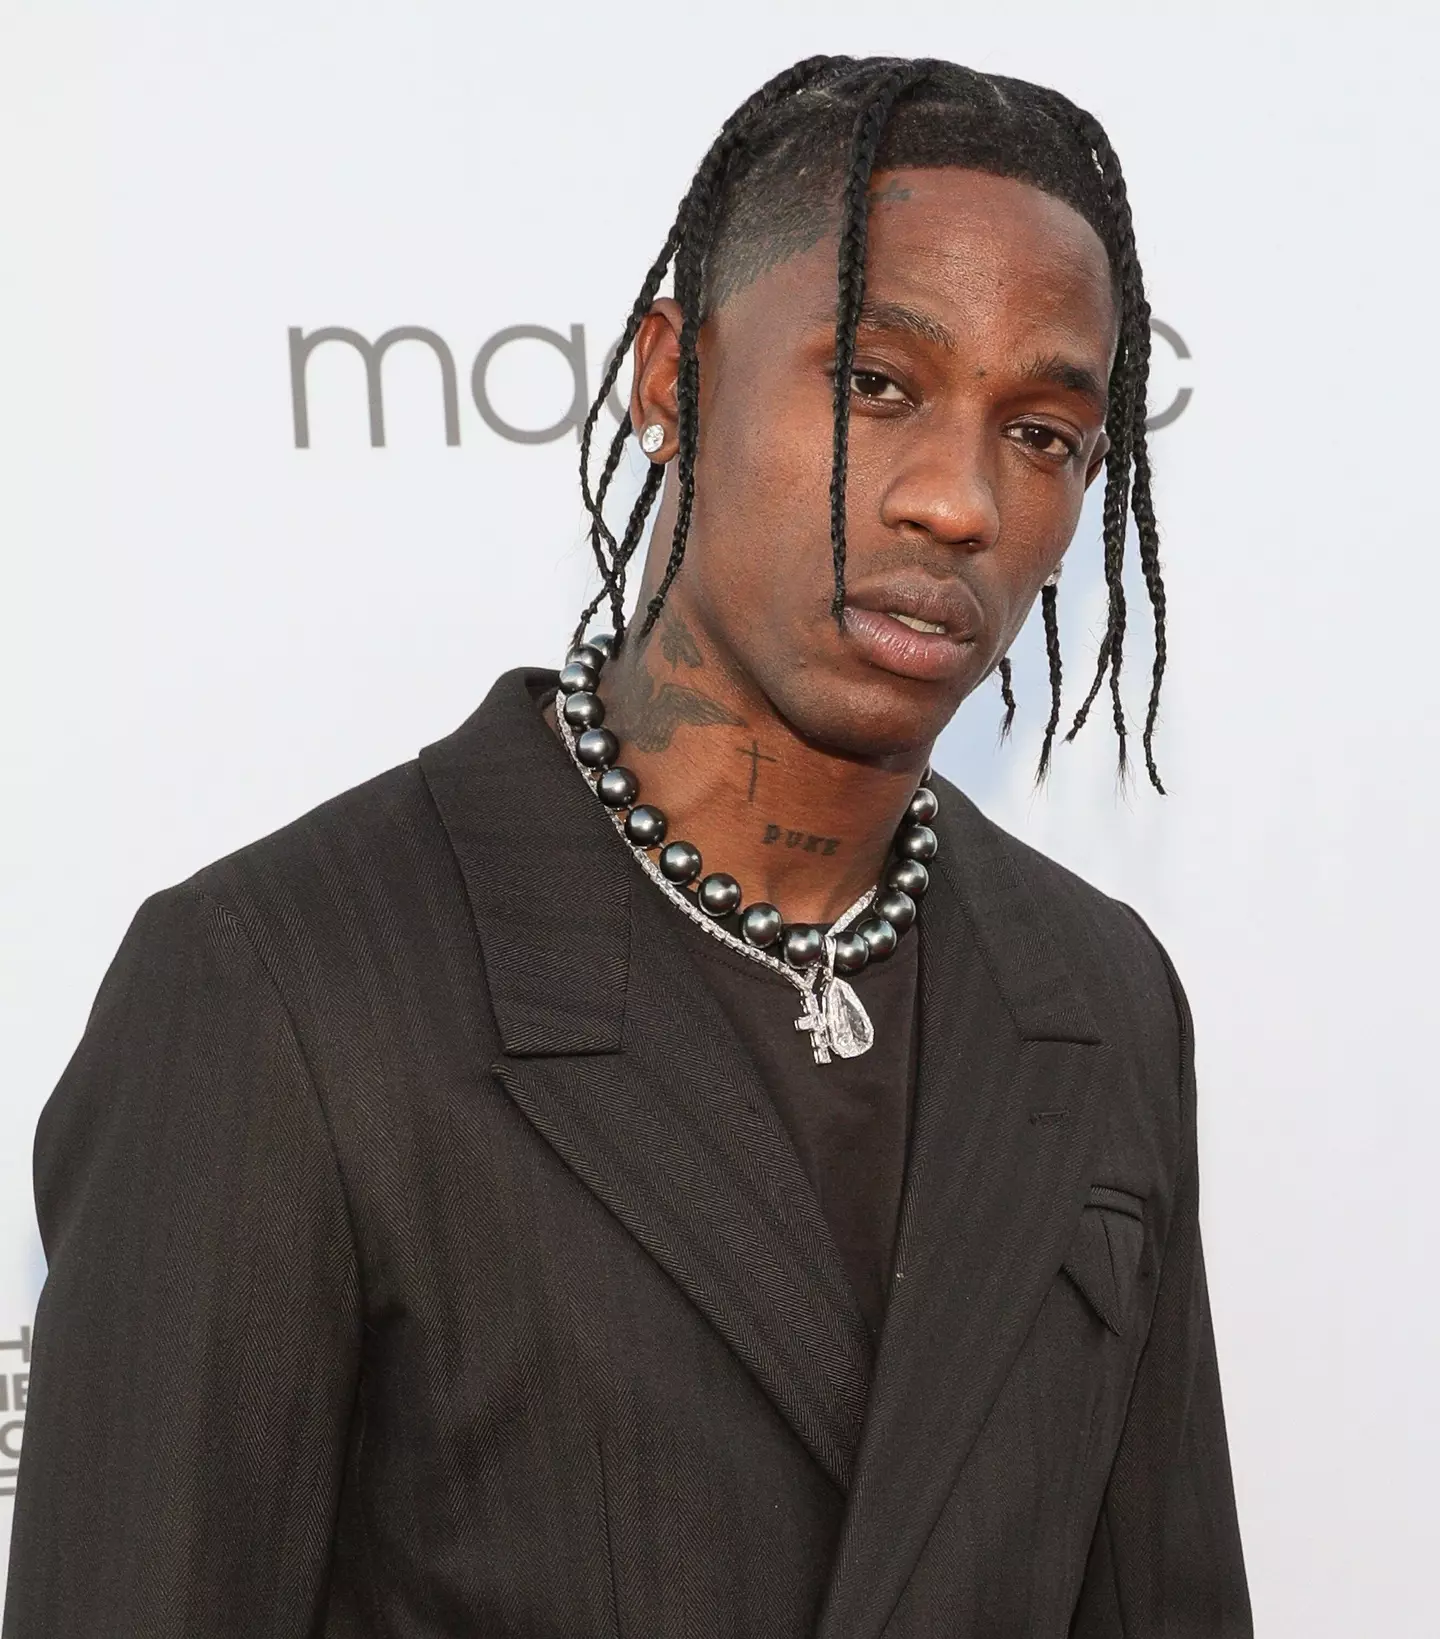 Travis Scott had a meal deal promo with McDonalds in 2020.